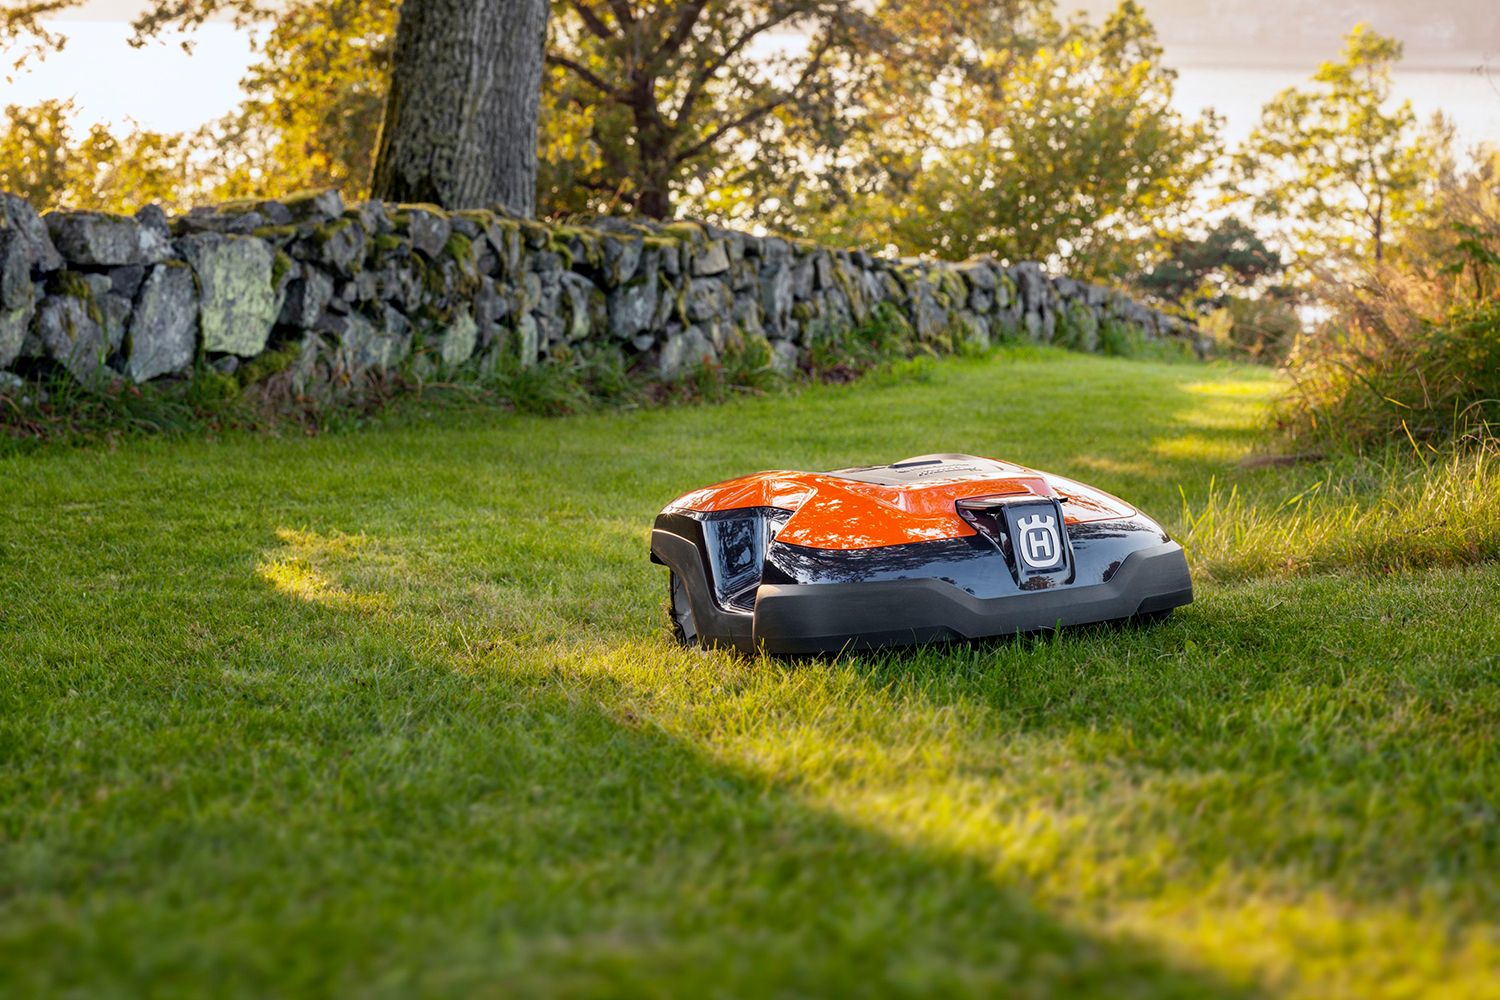 kit Mold Skov Is a Robot Lawn Mower Worth It? Let Us Weigh In | Digital Trends